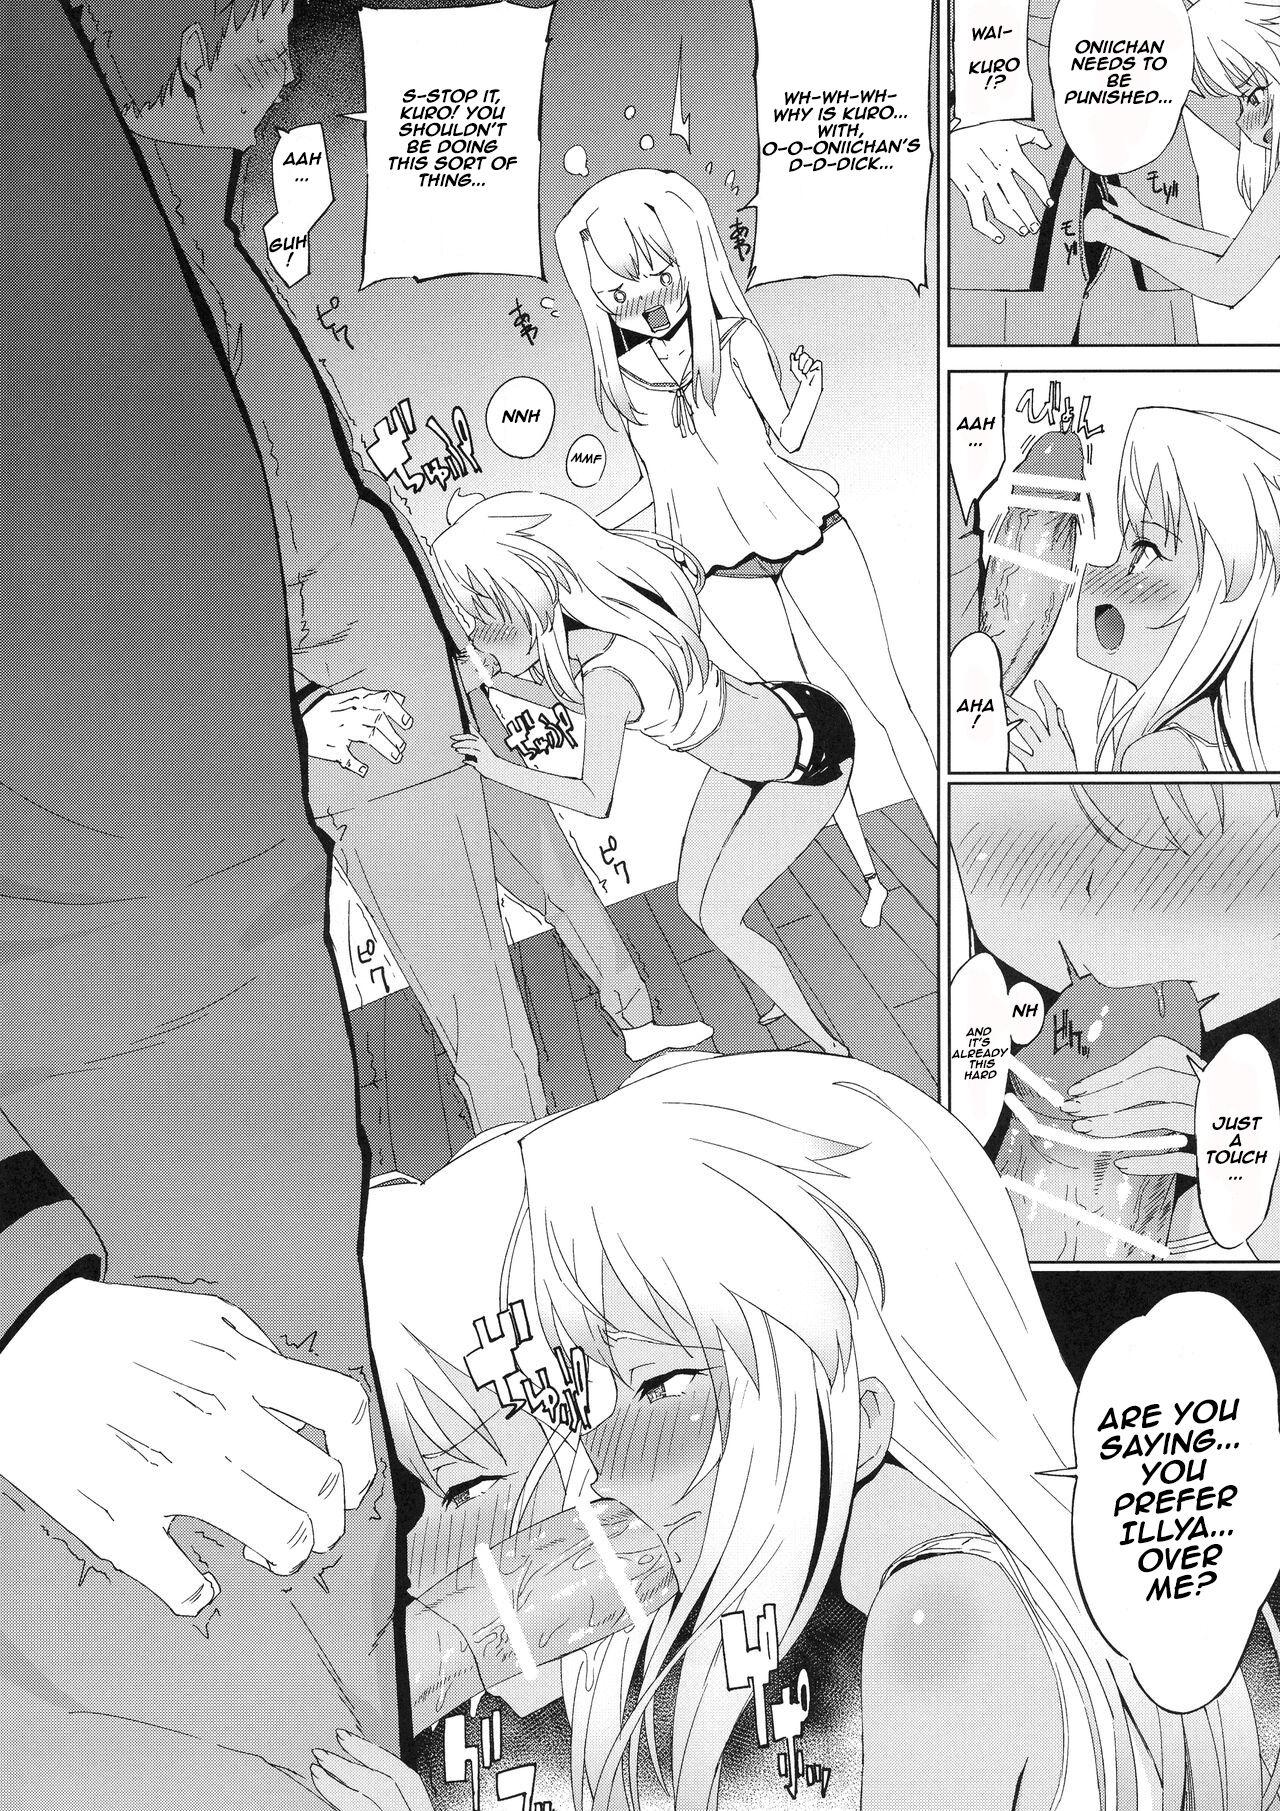 Jerking Off Oshiete Onii-chan - Fate kaleid liner prisma illya Perra - Page 4